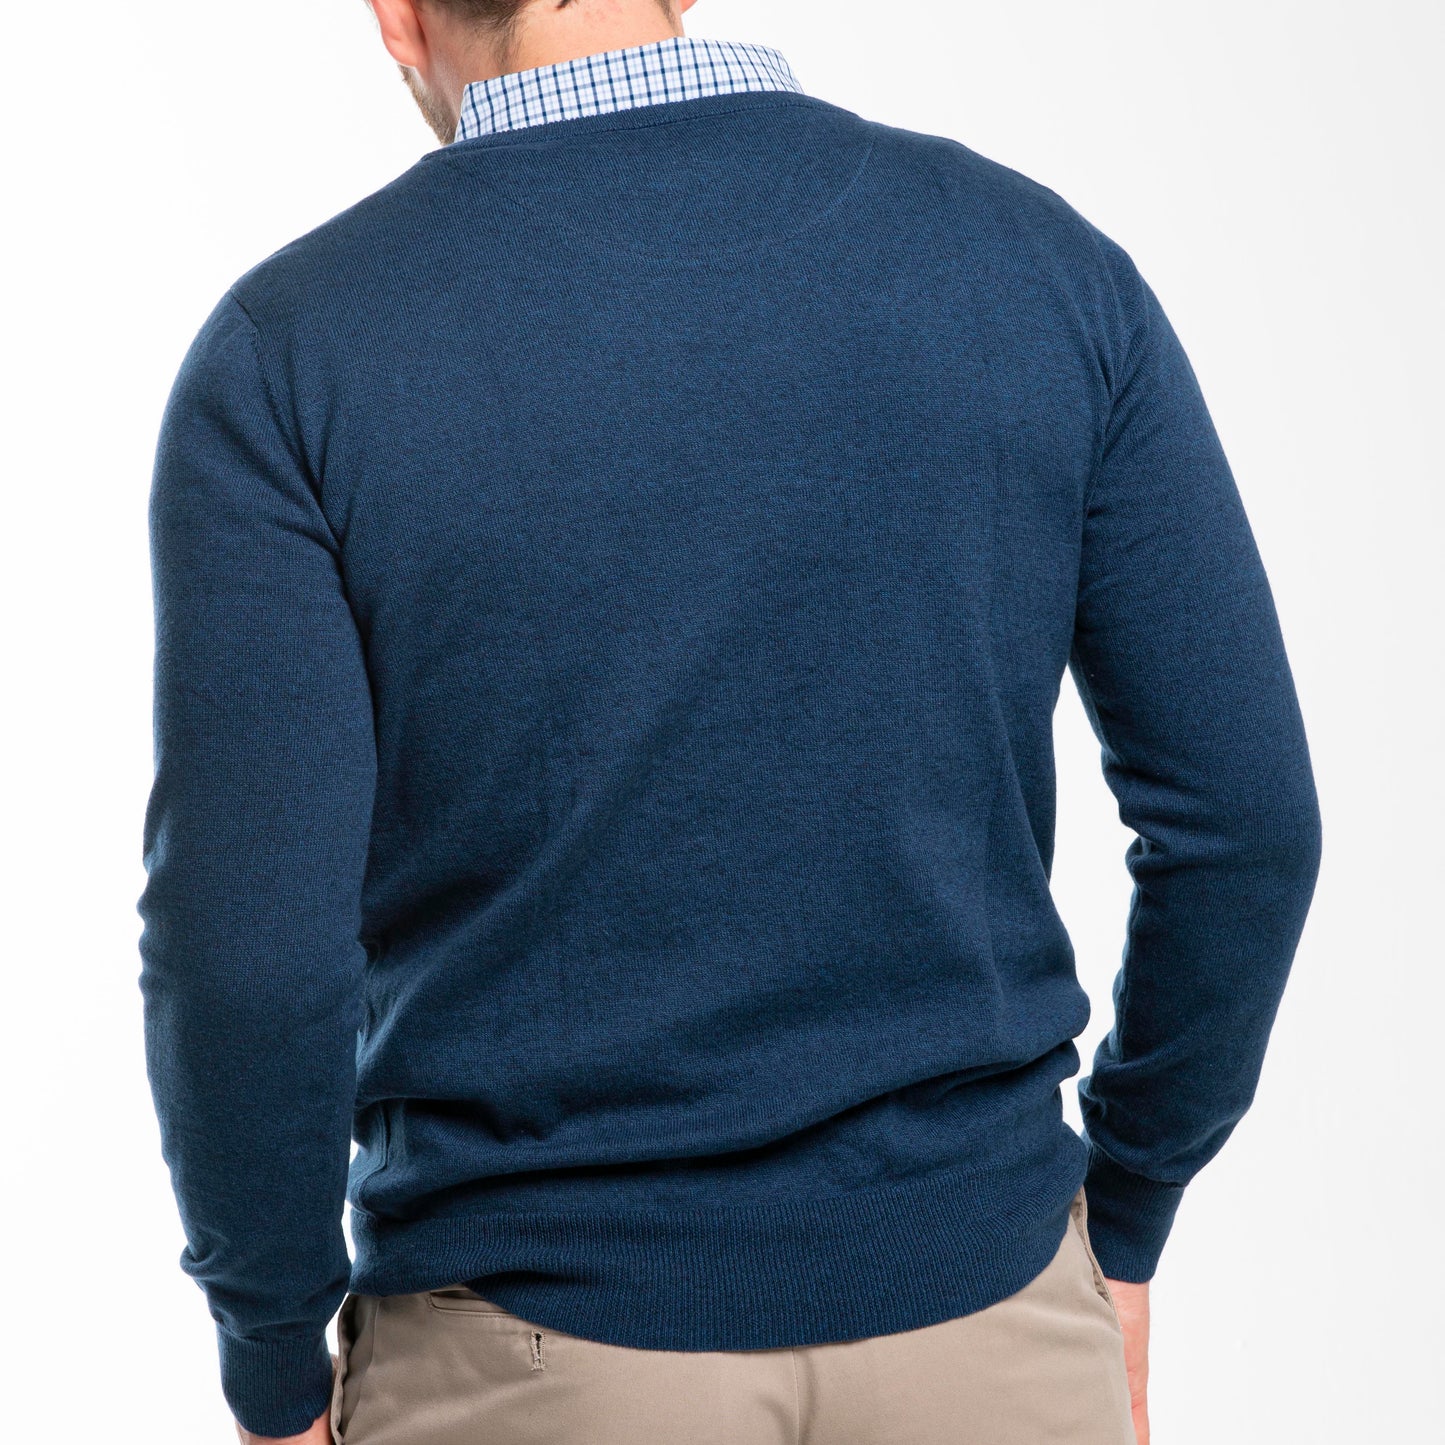 Ocean Blue Sweater with Black & Blue Check Collar